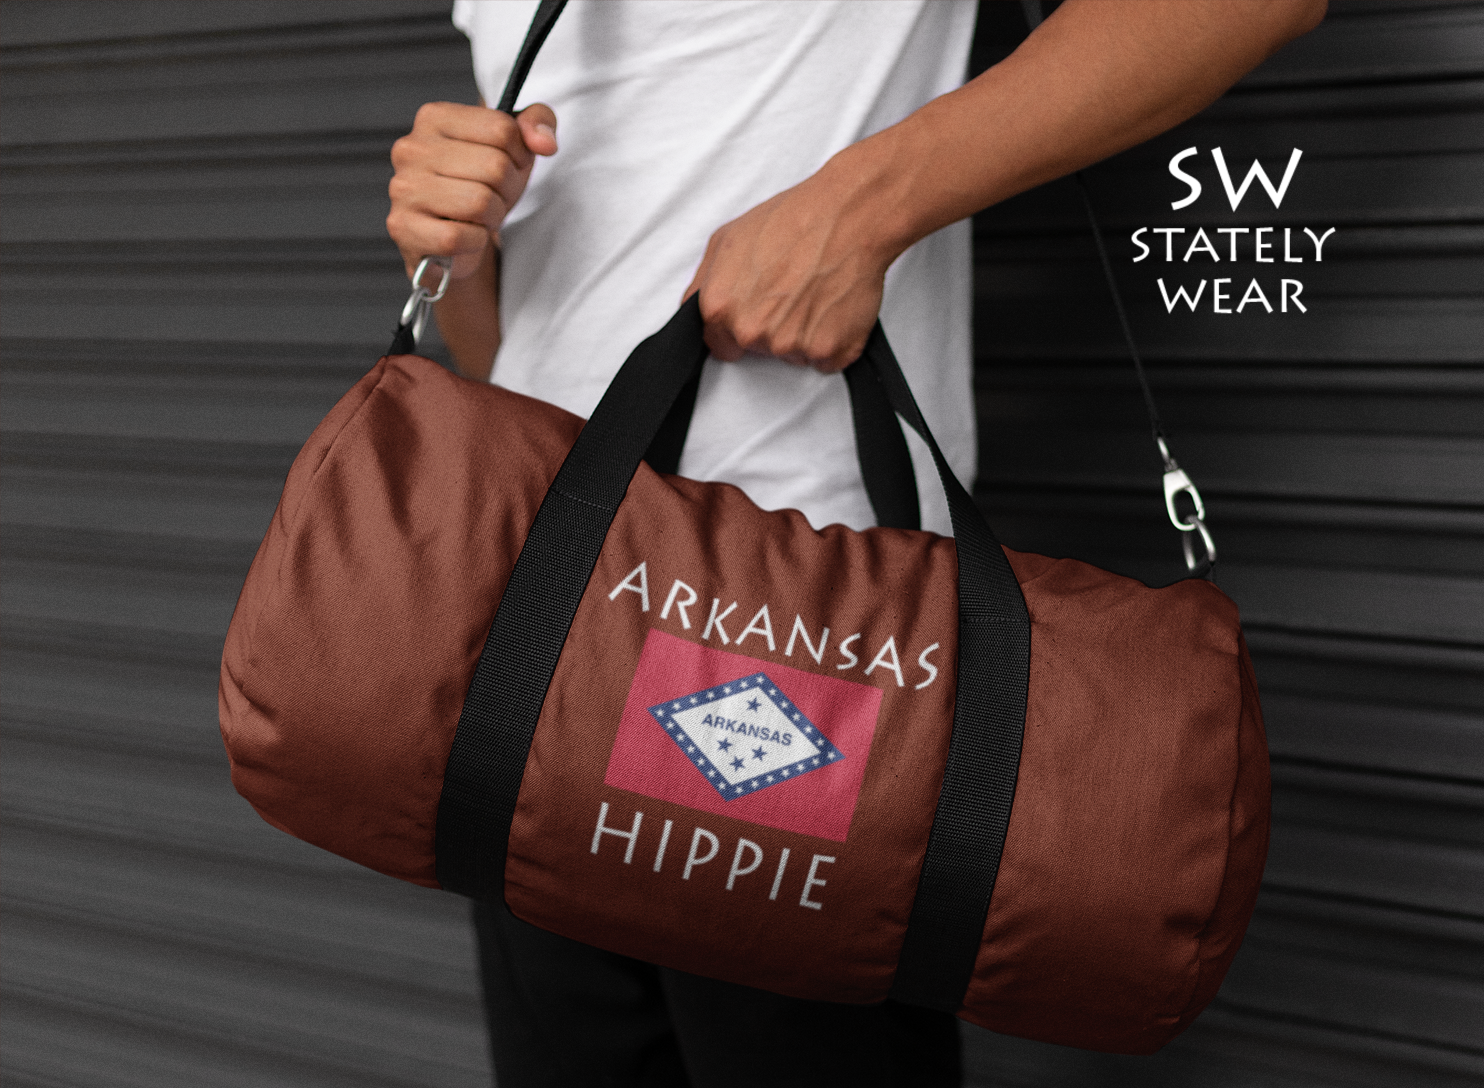 Stately Wear's Arkansas Flag Hippie duffel bag is colorful, iconic and stylish. We are a Katie Couric Shop partner. This duffel bag is the perfect accessory as a beach bag, ski bag, travel bag, shopping bag & gym bag, Pilates bag or yoga bag. Custom made one-at-a-time with environmentally friendly biodegradable inks & dyes. 2 sizes to choose.  Stately Wear's bags are very durable, soft and colorful duffel bags.